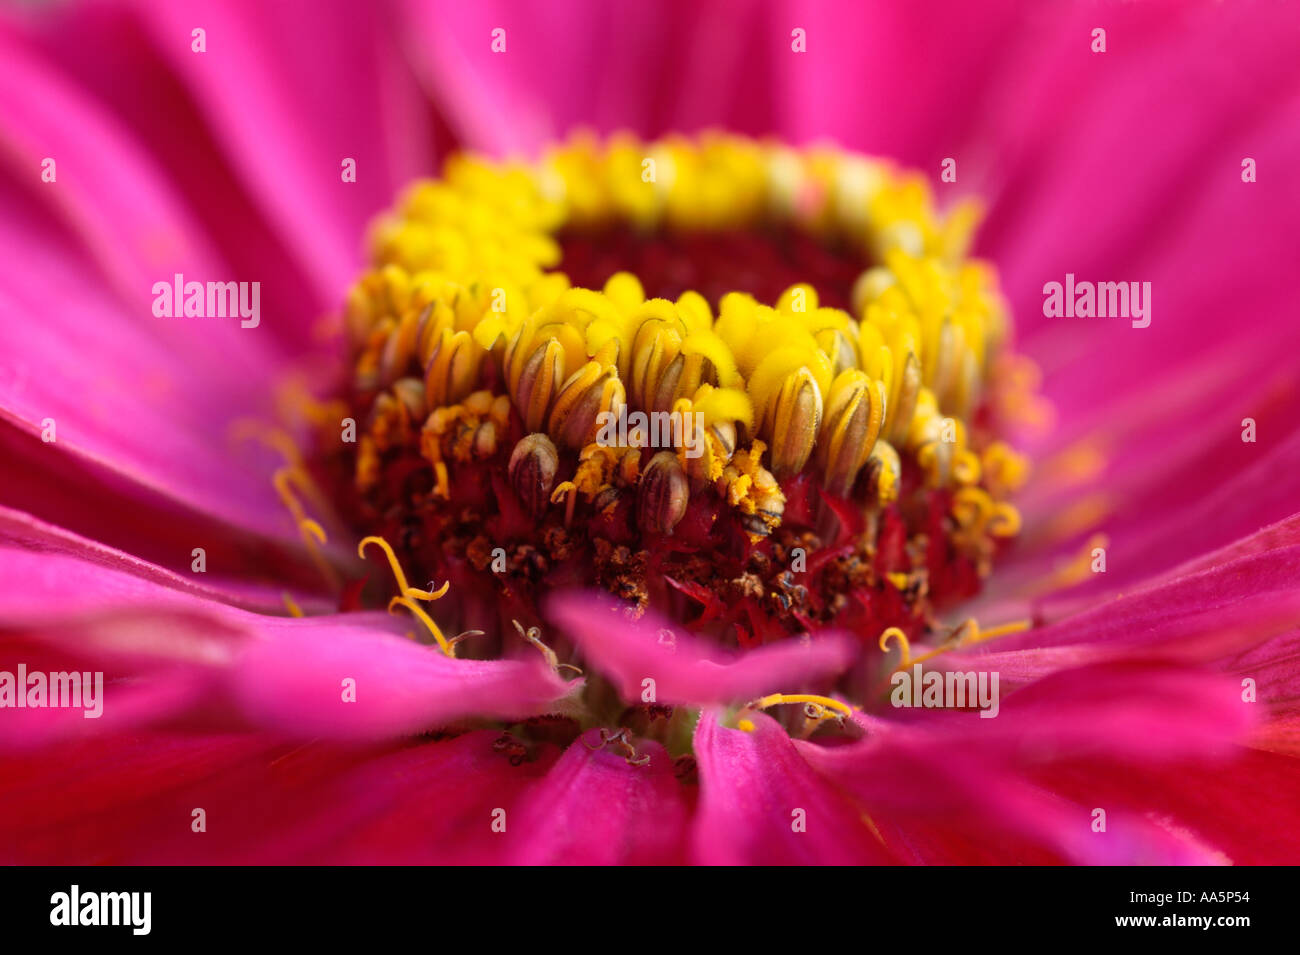 Centre of pink and yellow Zinnia Flower Stock Photo